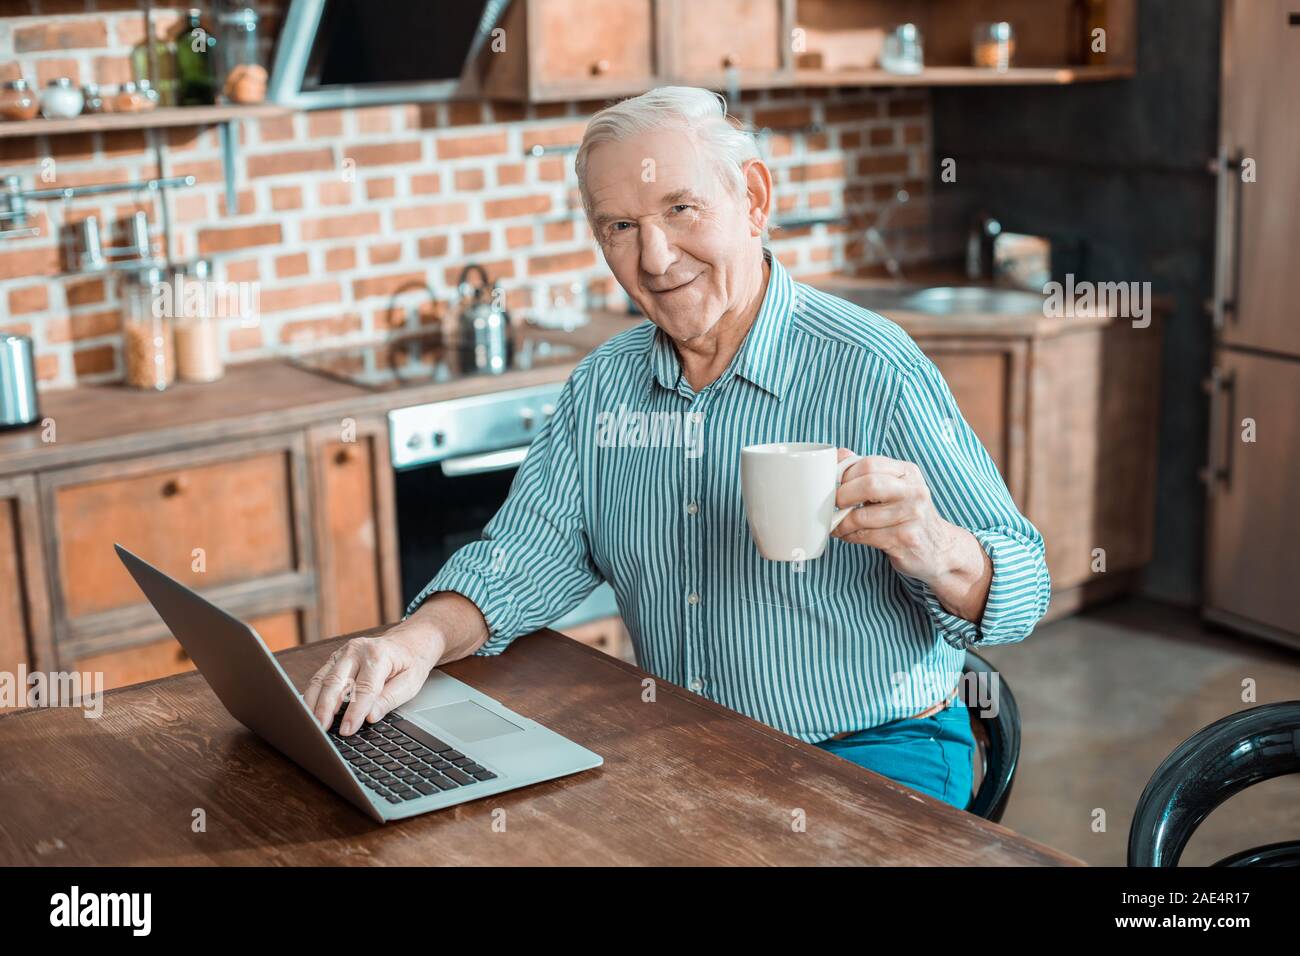 Cheerful positive man looking at you Stock Photo